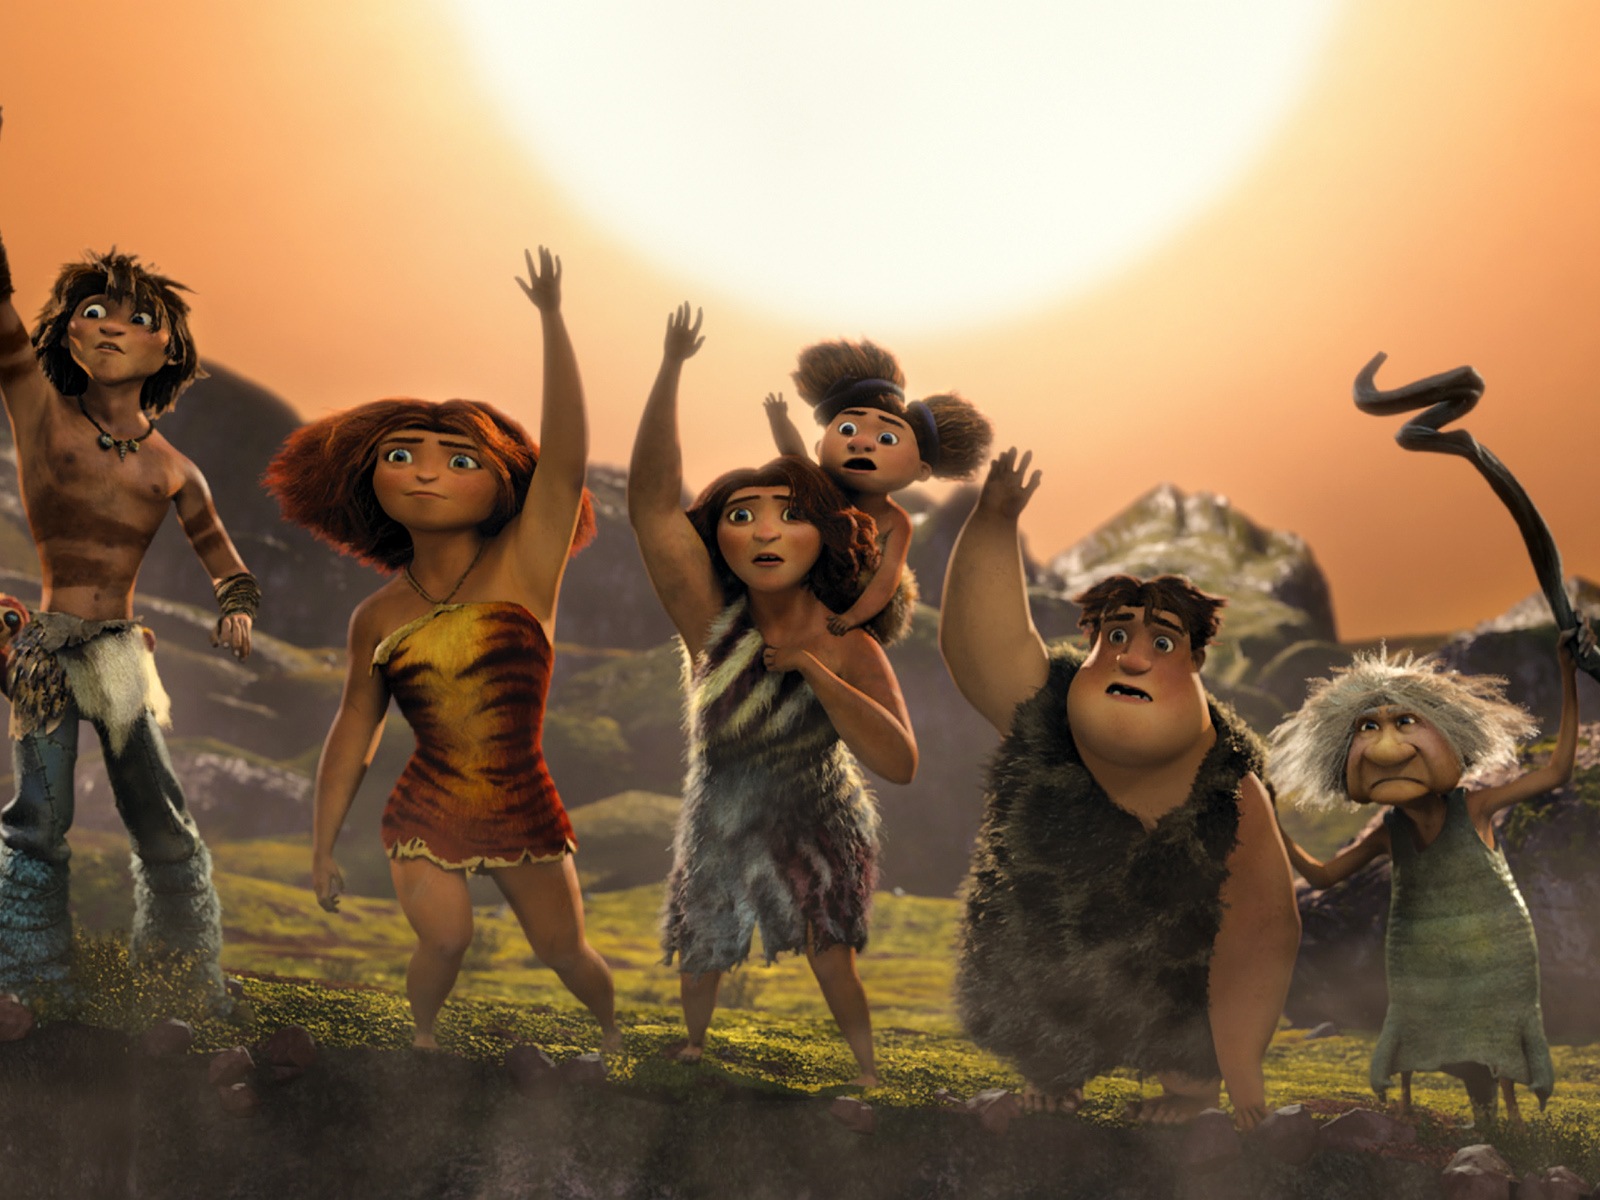 The Croods HD movie wallpapers #4 - 1600x1200